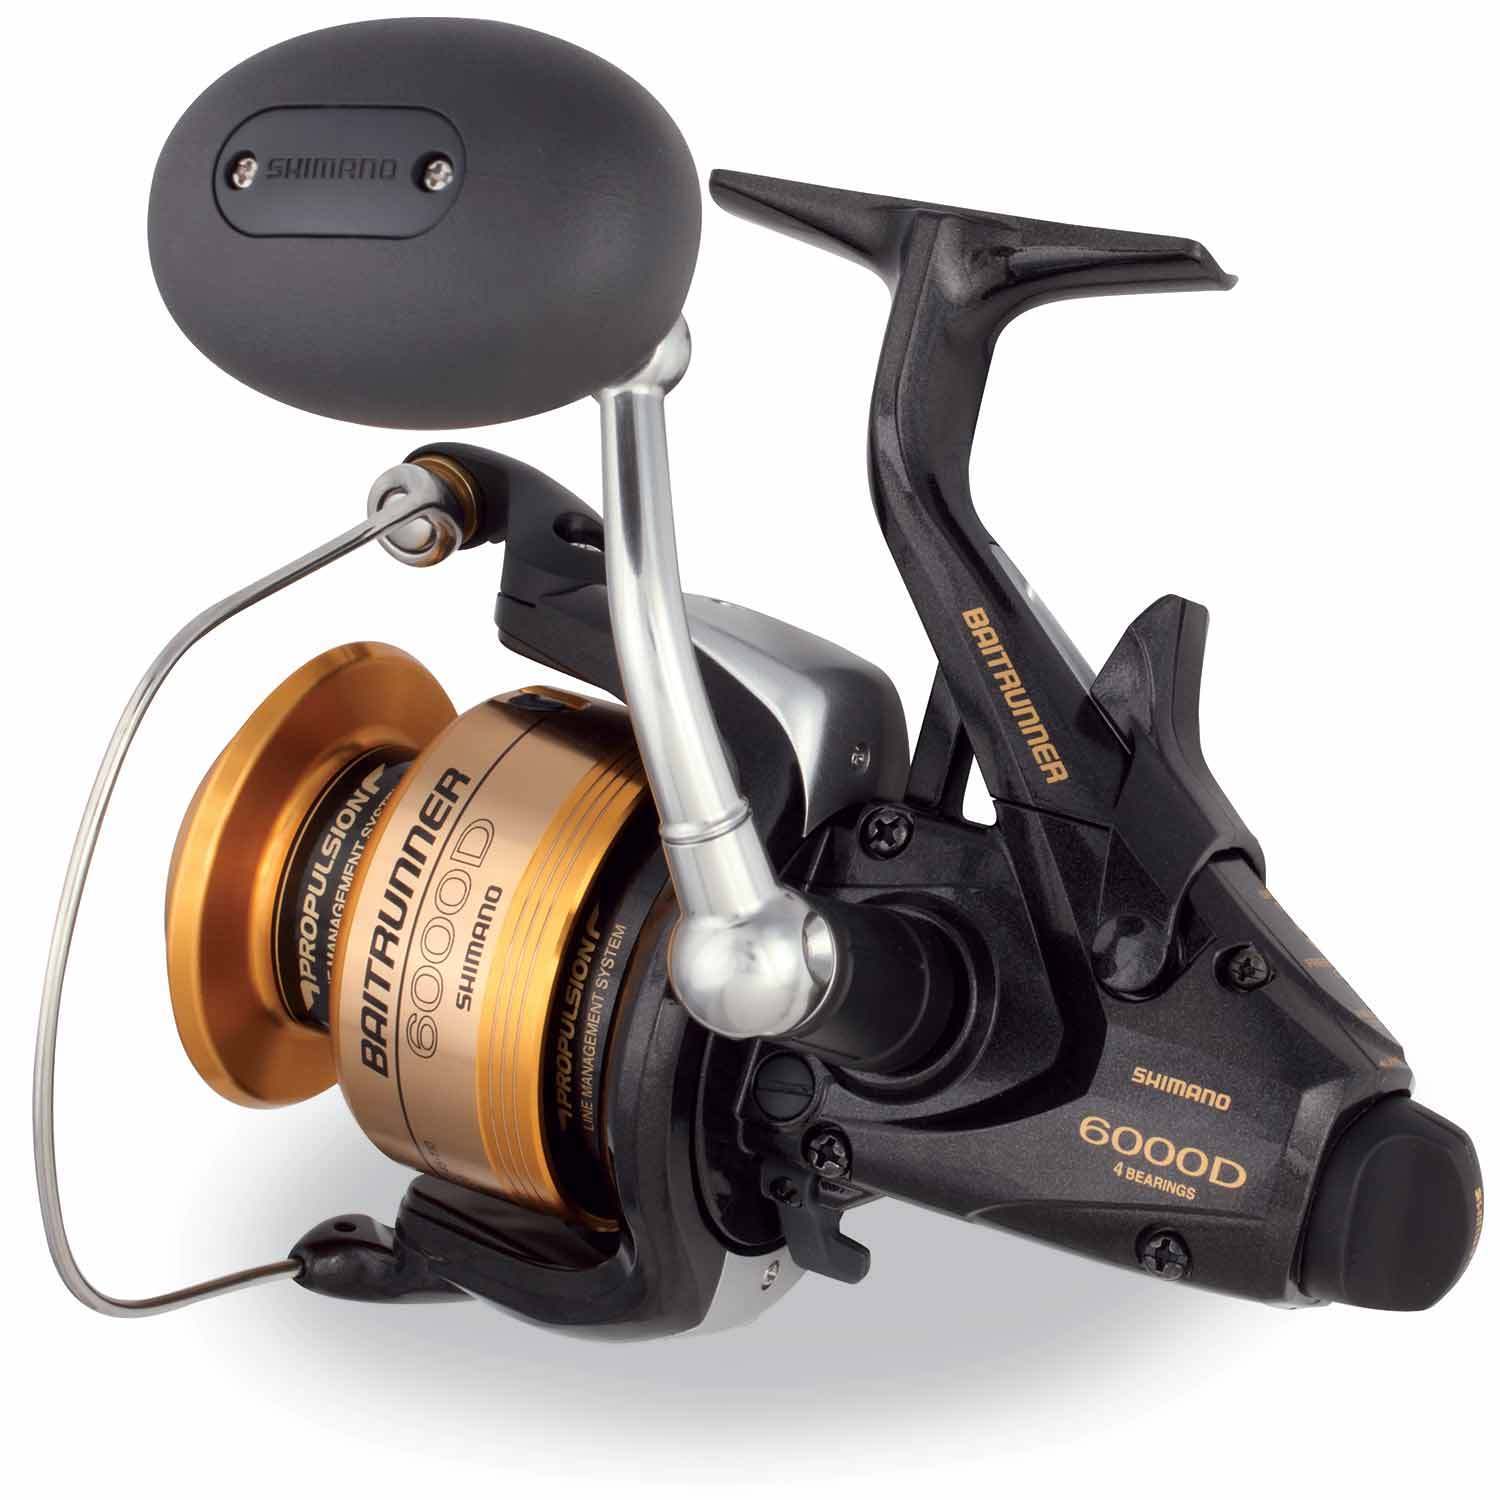 show original title Details about   Replacement shimano baitrunner reel of 3500b button clutch drag rd3292 